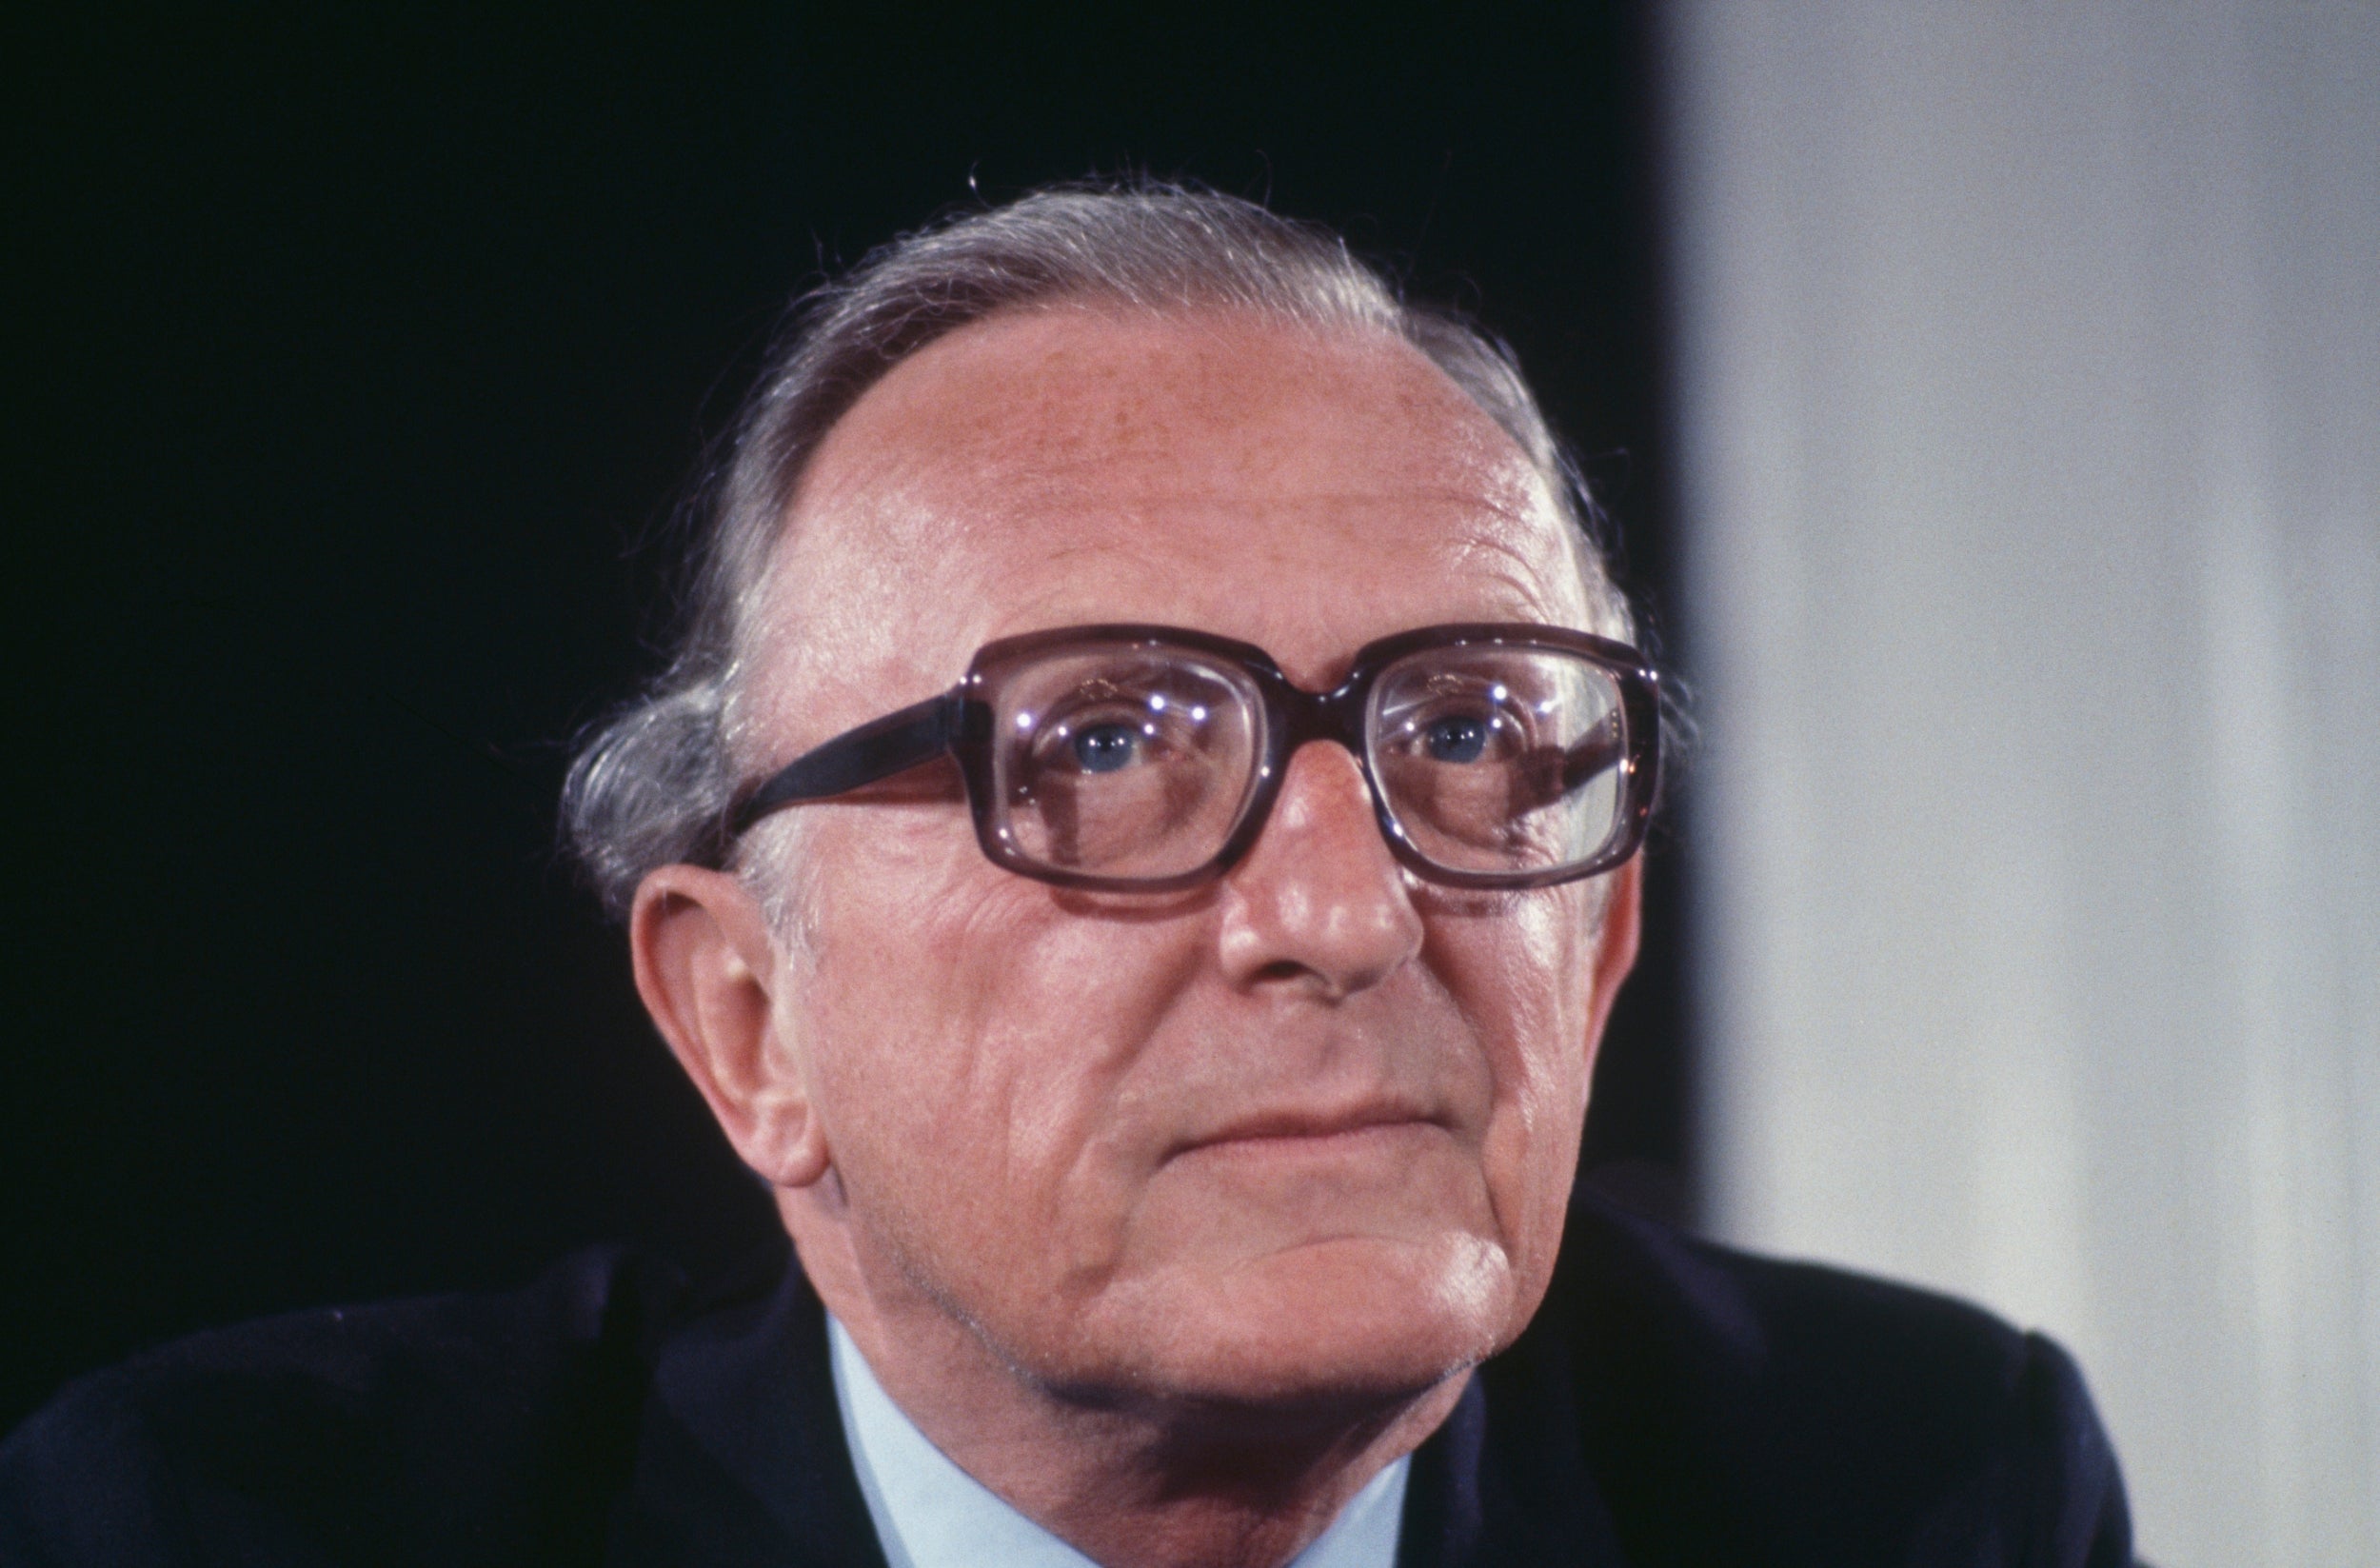 Lord Carrington was foreign secretary in 1982 when Argentina invaded the Falklands Islands